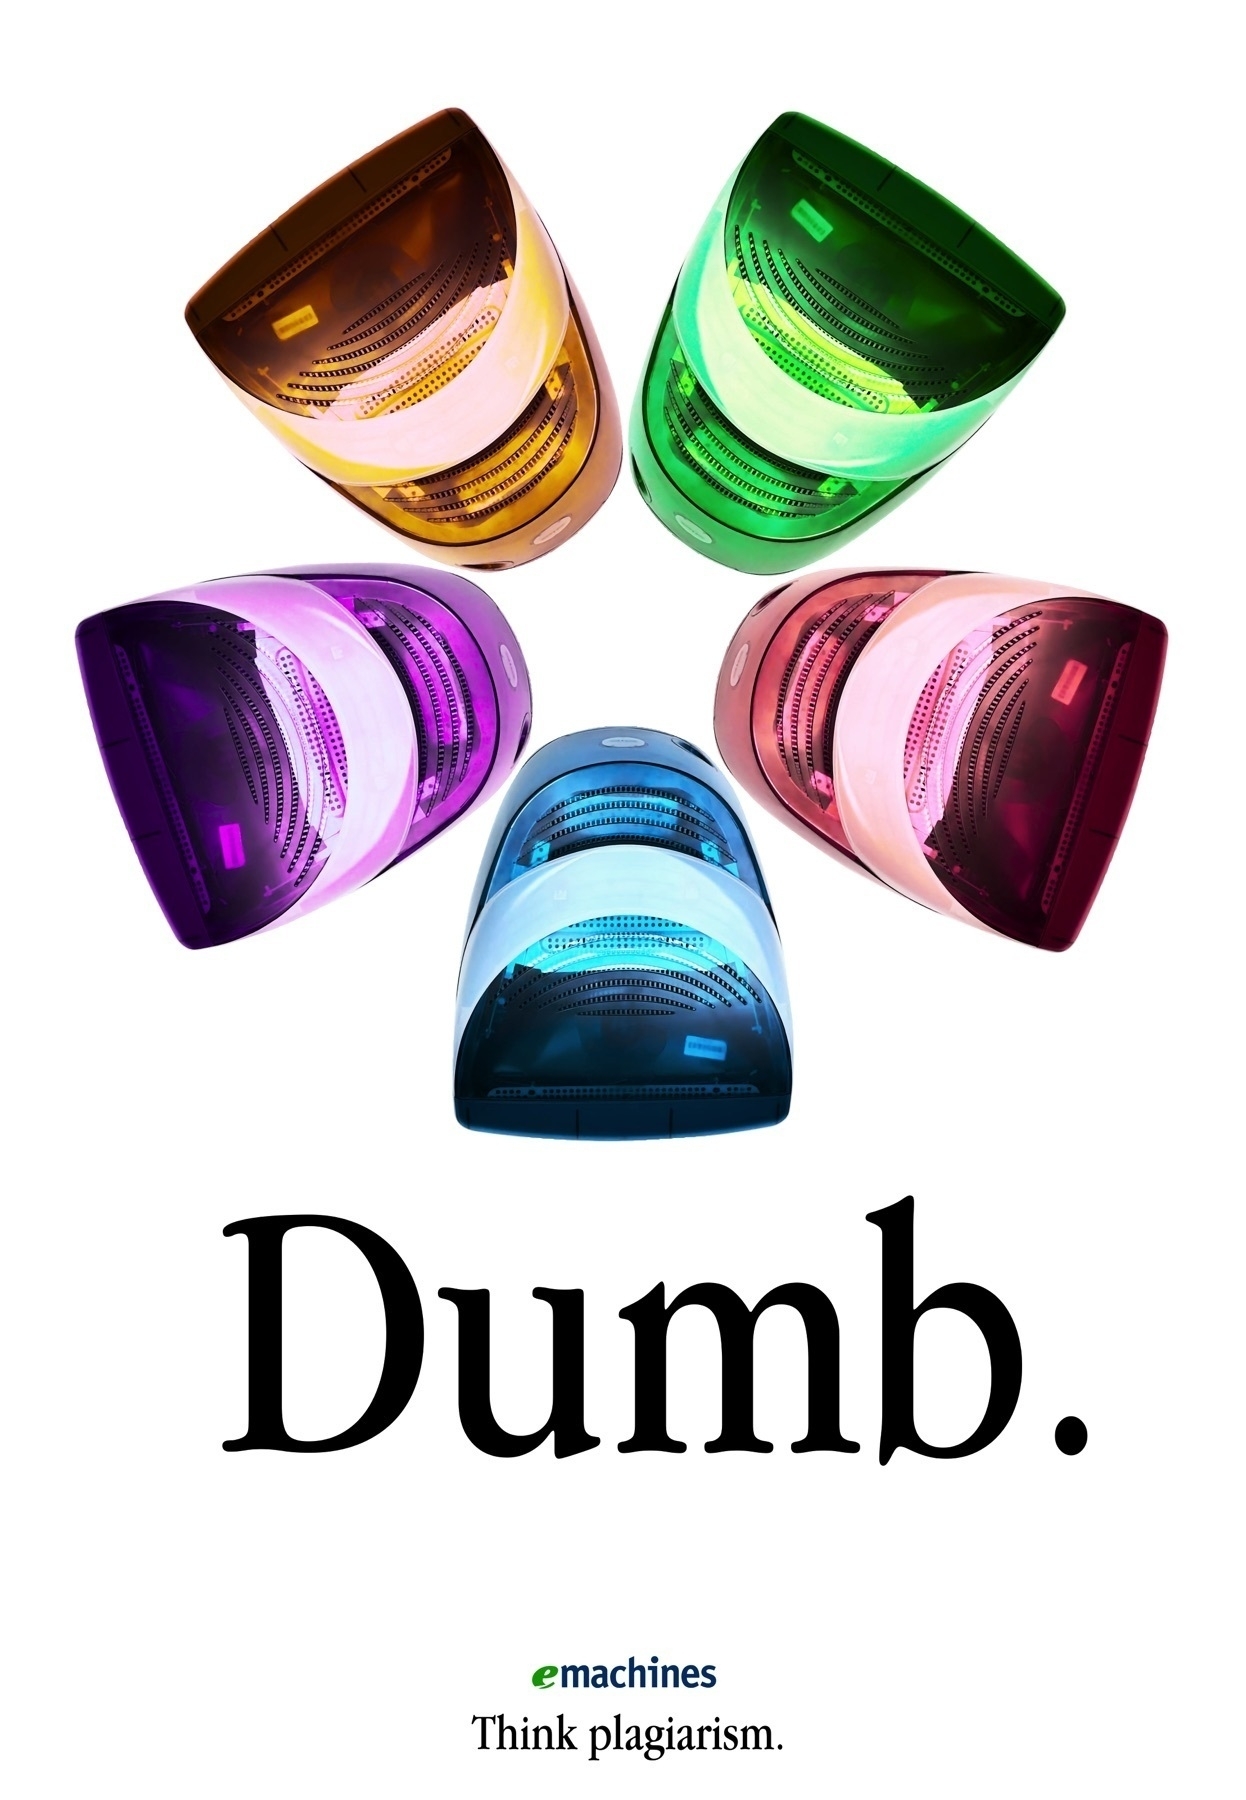 eMachines eOne Dumb poster. An homage to the Apple iMac five flavors Yum poster. Think plagairism.